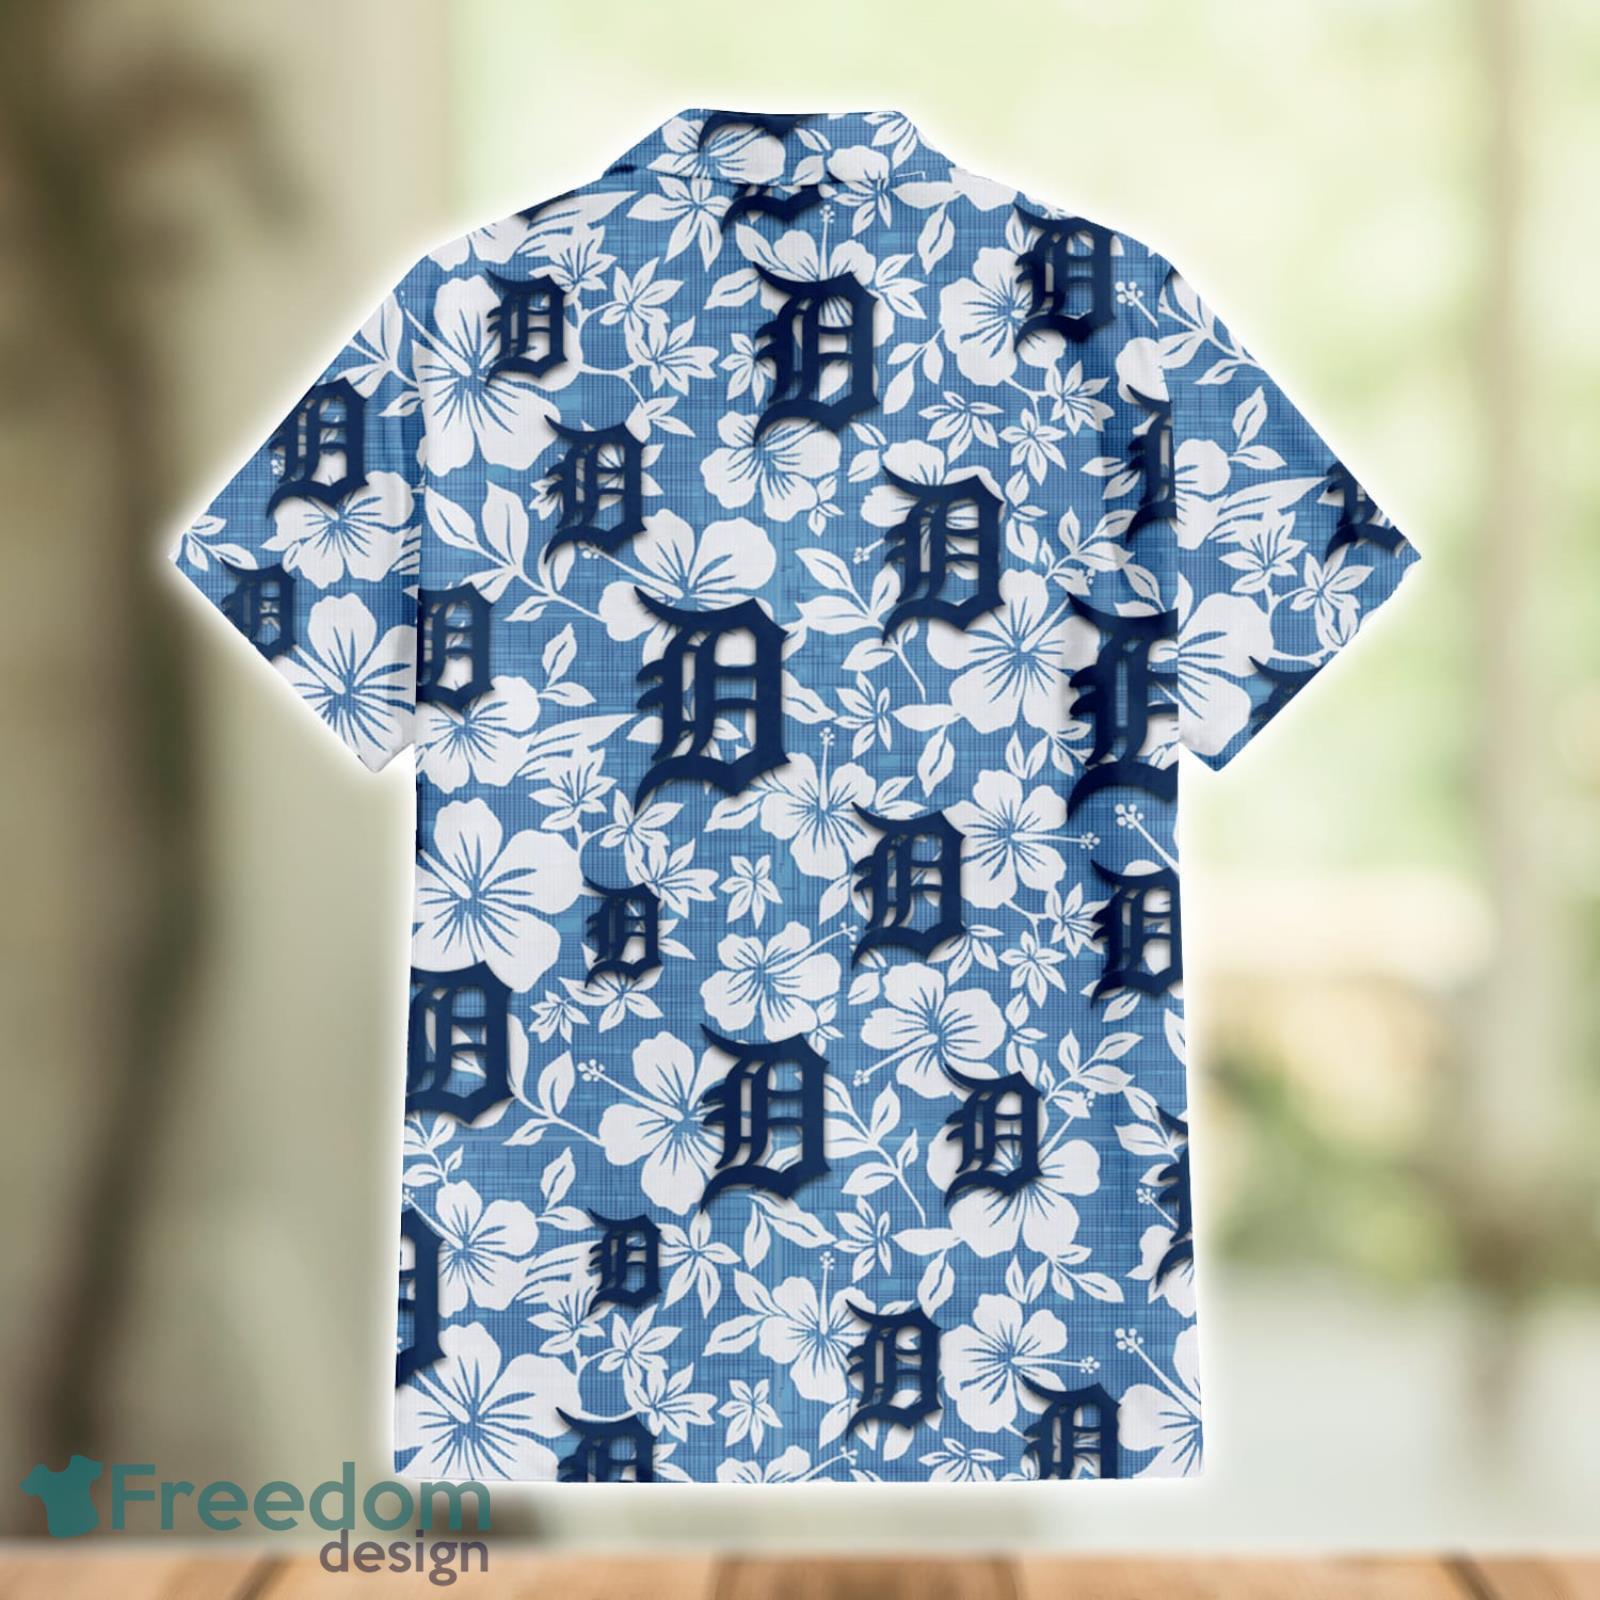 Detroit Tigers Logo And Yellow Flower Tropical Hawaiian Shirt For Fans -  Freedomdesign